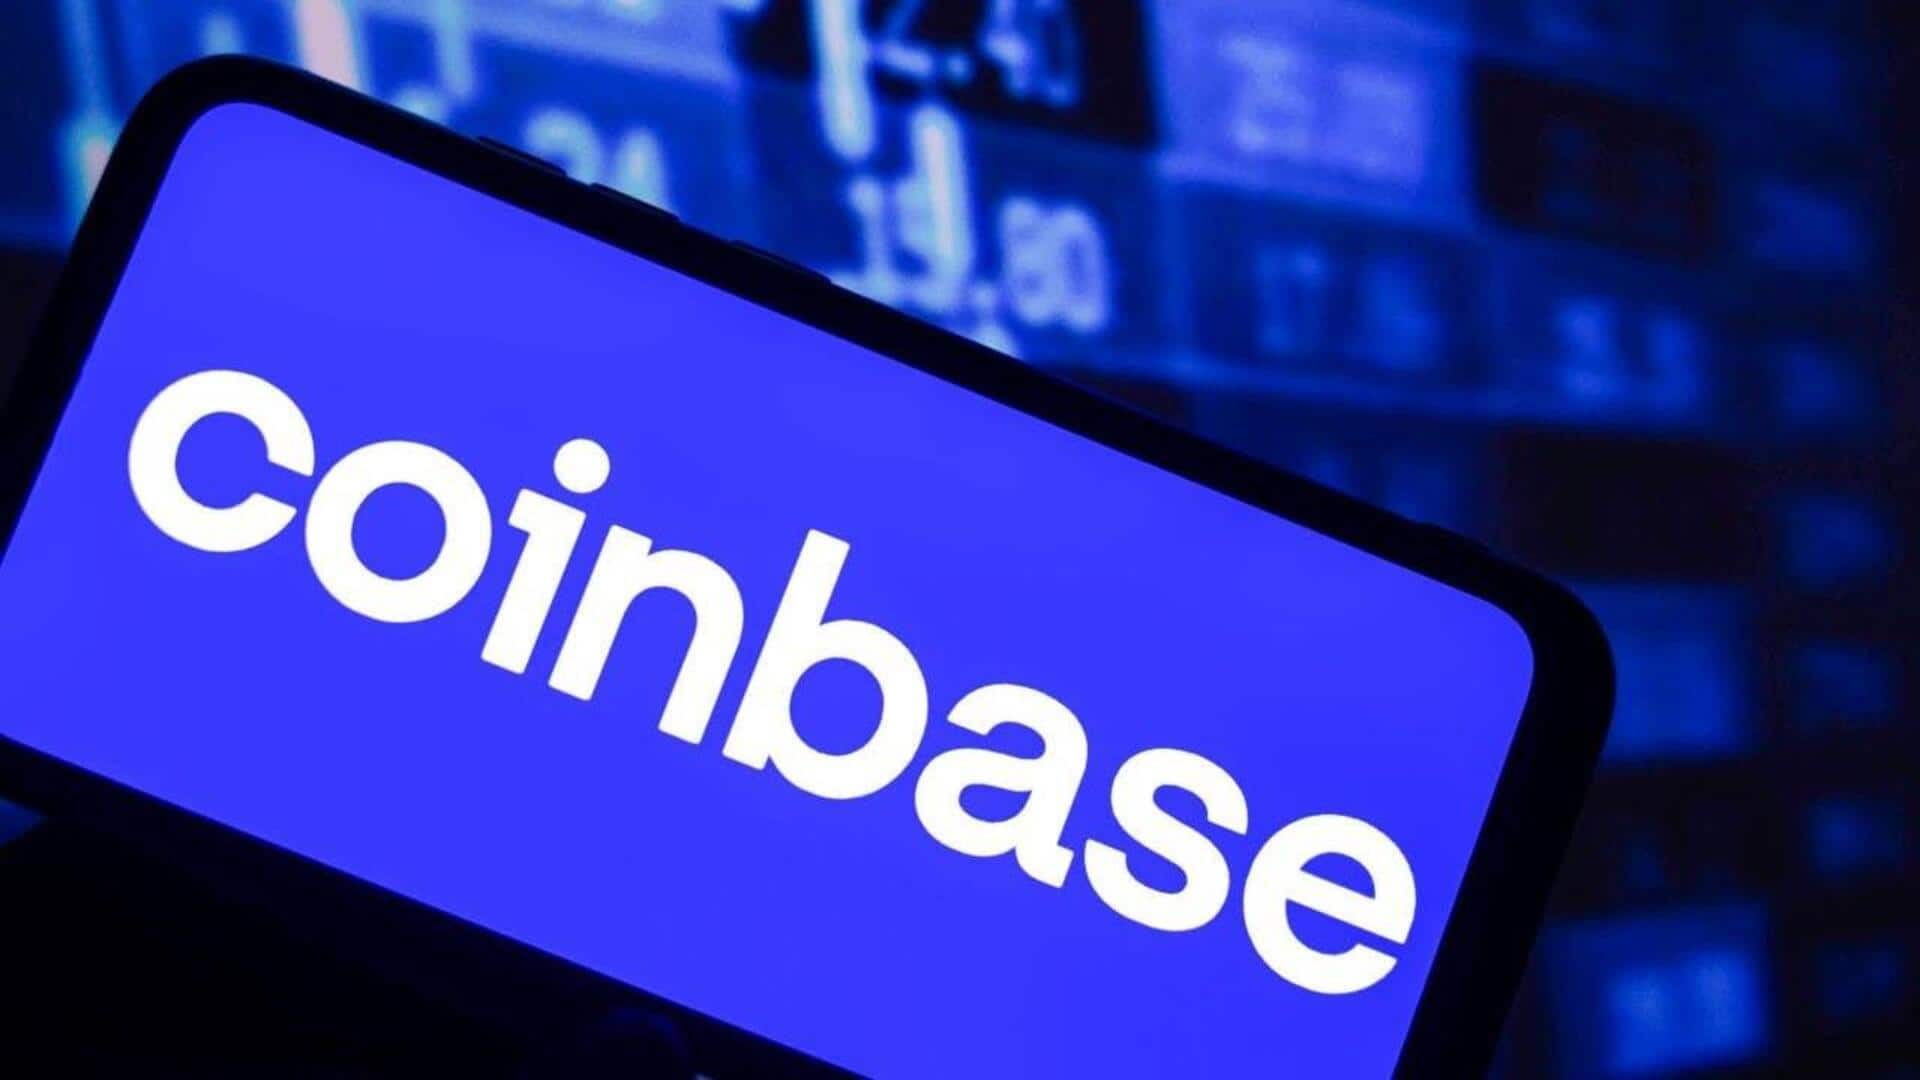 Coinbase trading accounts affected by outage have been restored